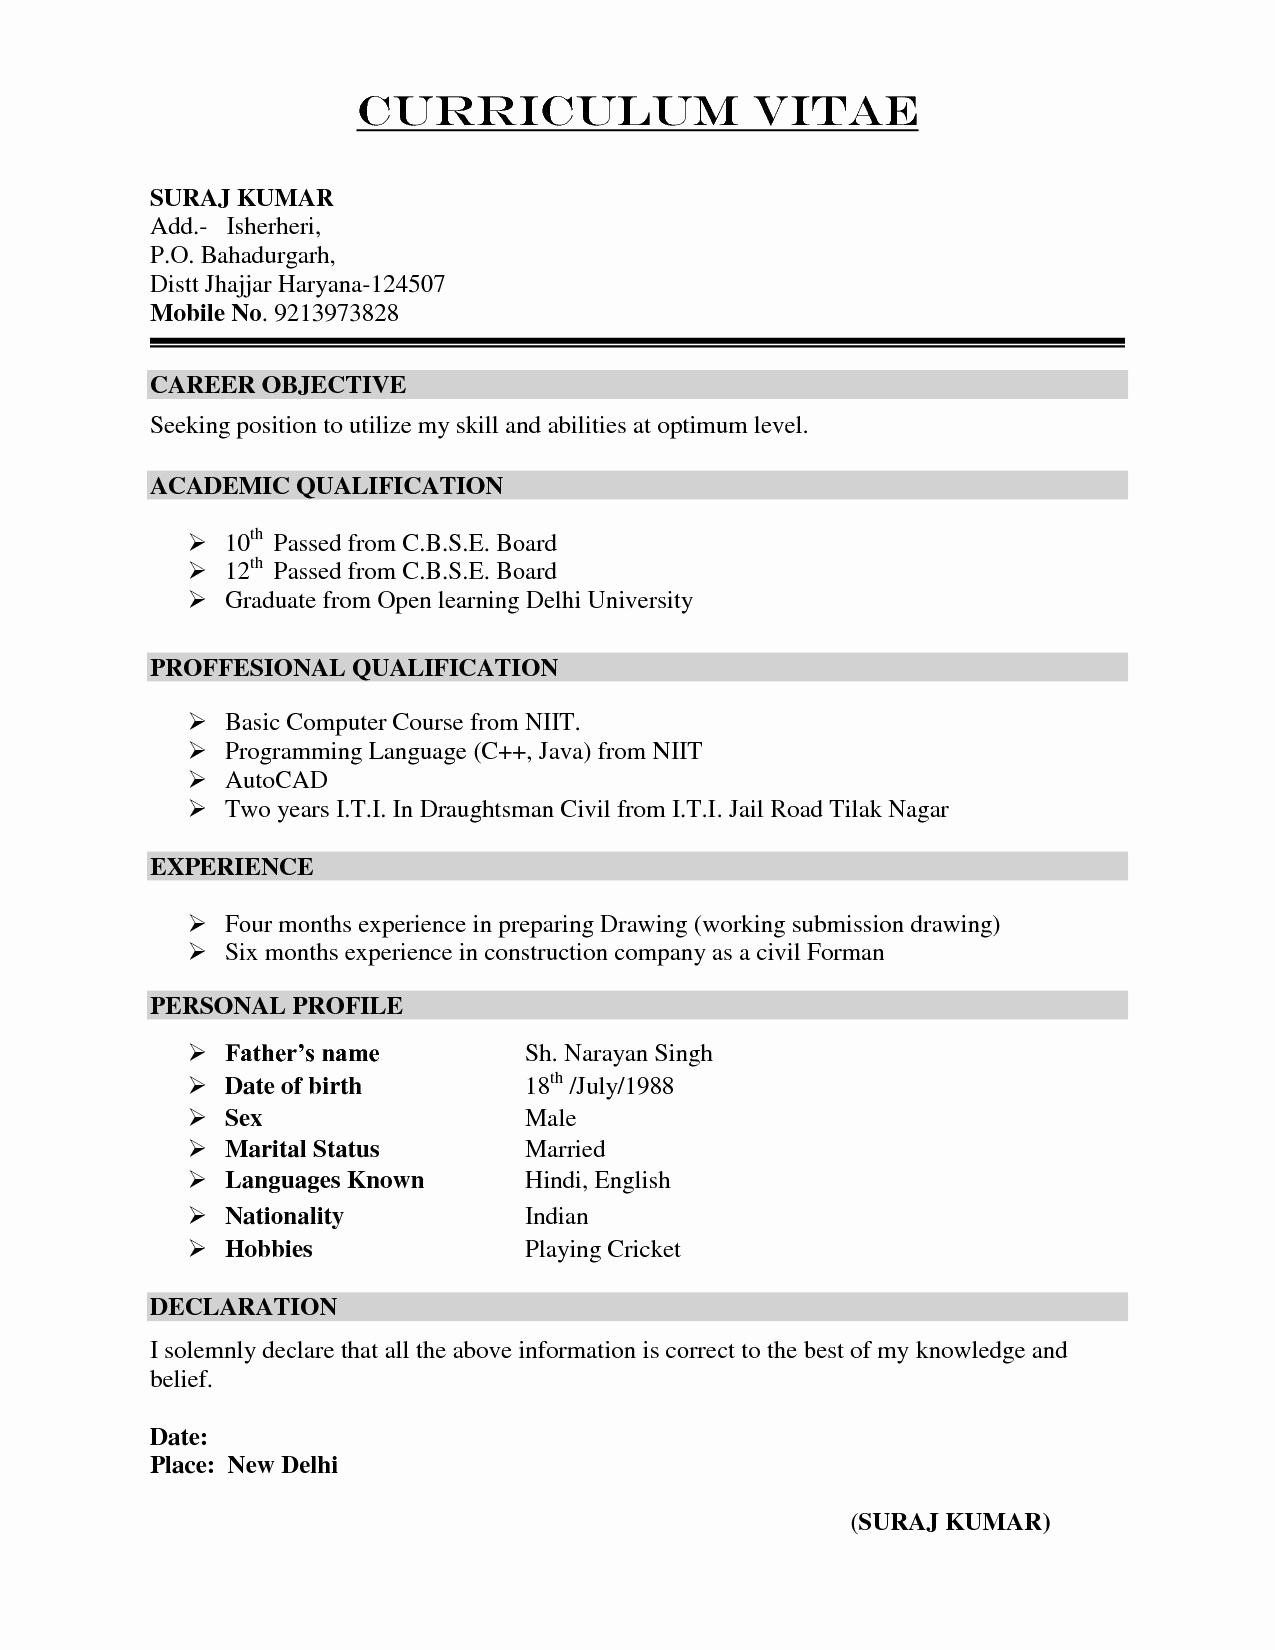 Cabin Crew Resume Sample for Freshers 85 Nice Cabin Crew Resume Fresher with Pics